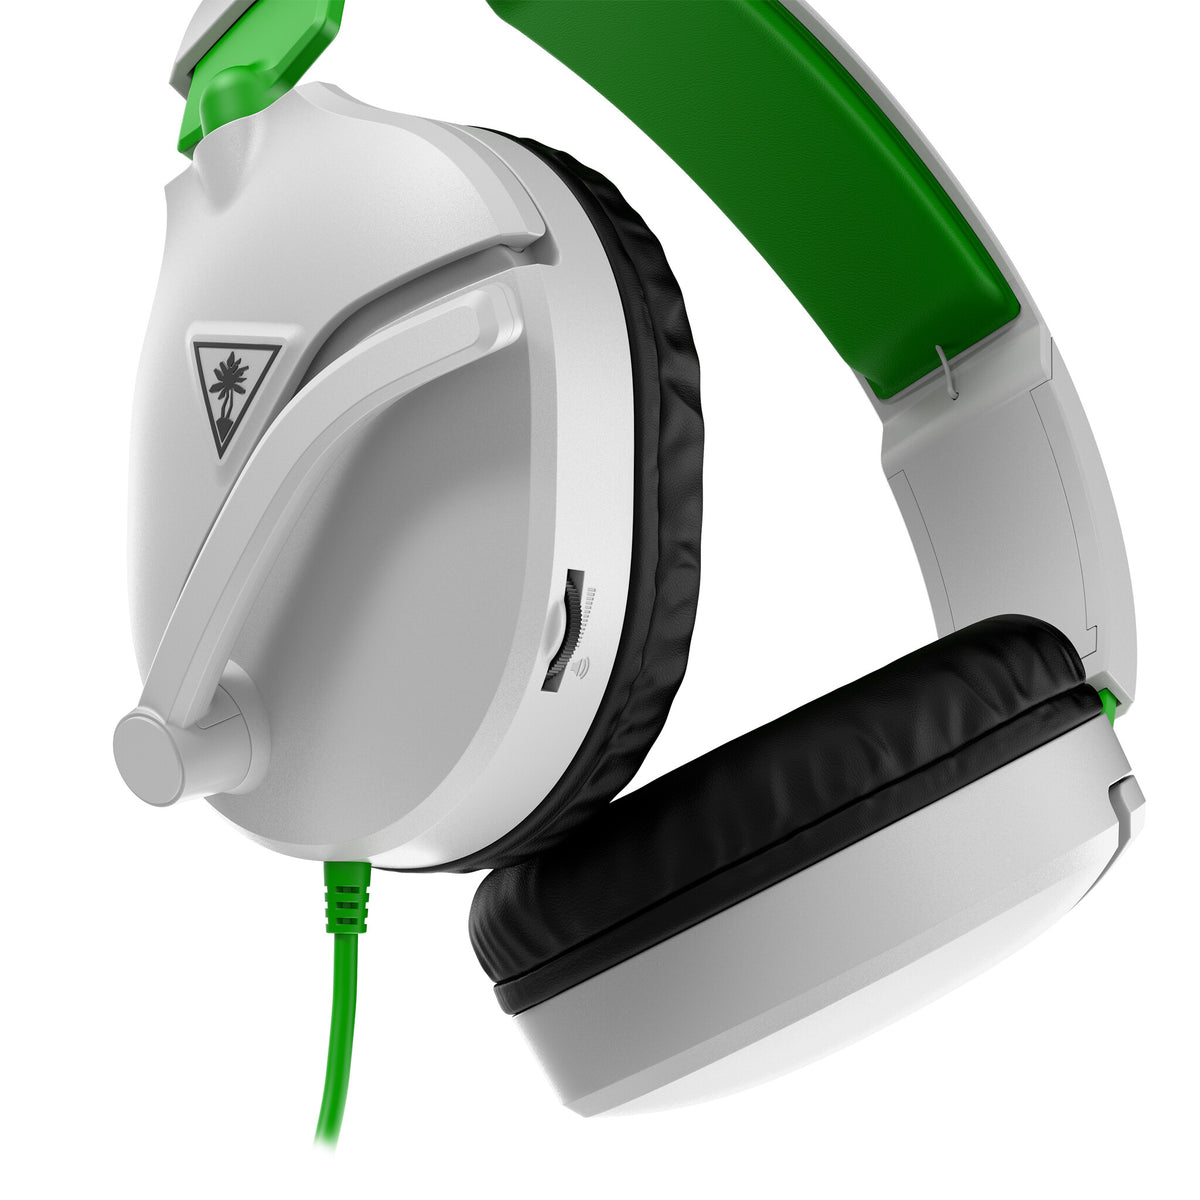 Turtle Beach Recon 70 - Wired Gaming Headset for Xbox Series X|S in Green / White